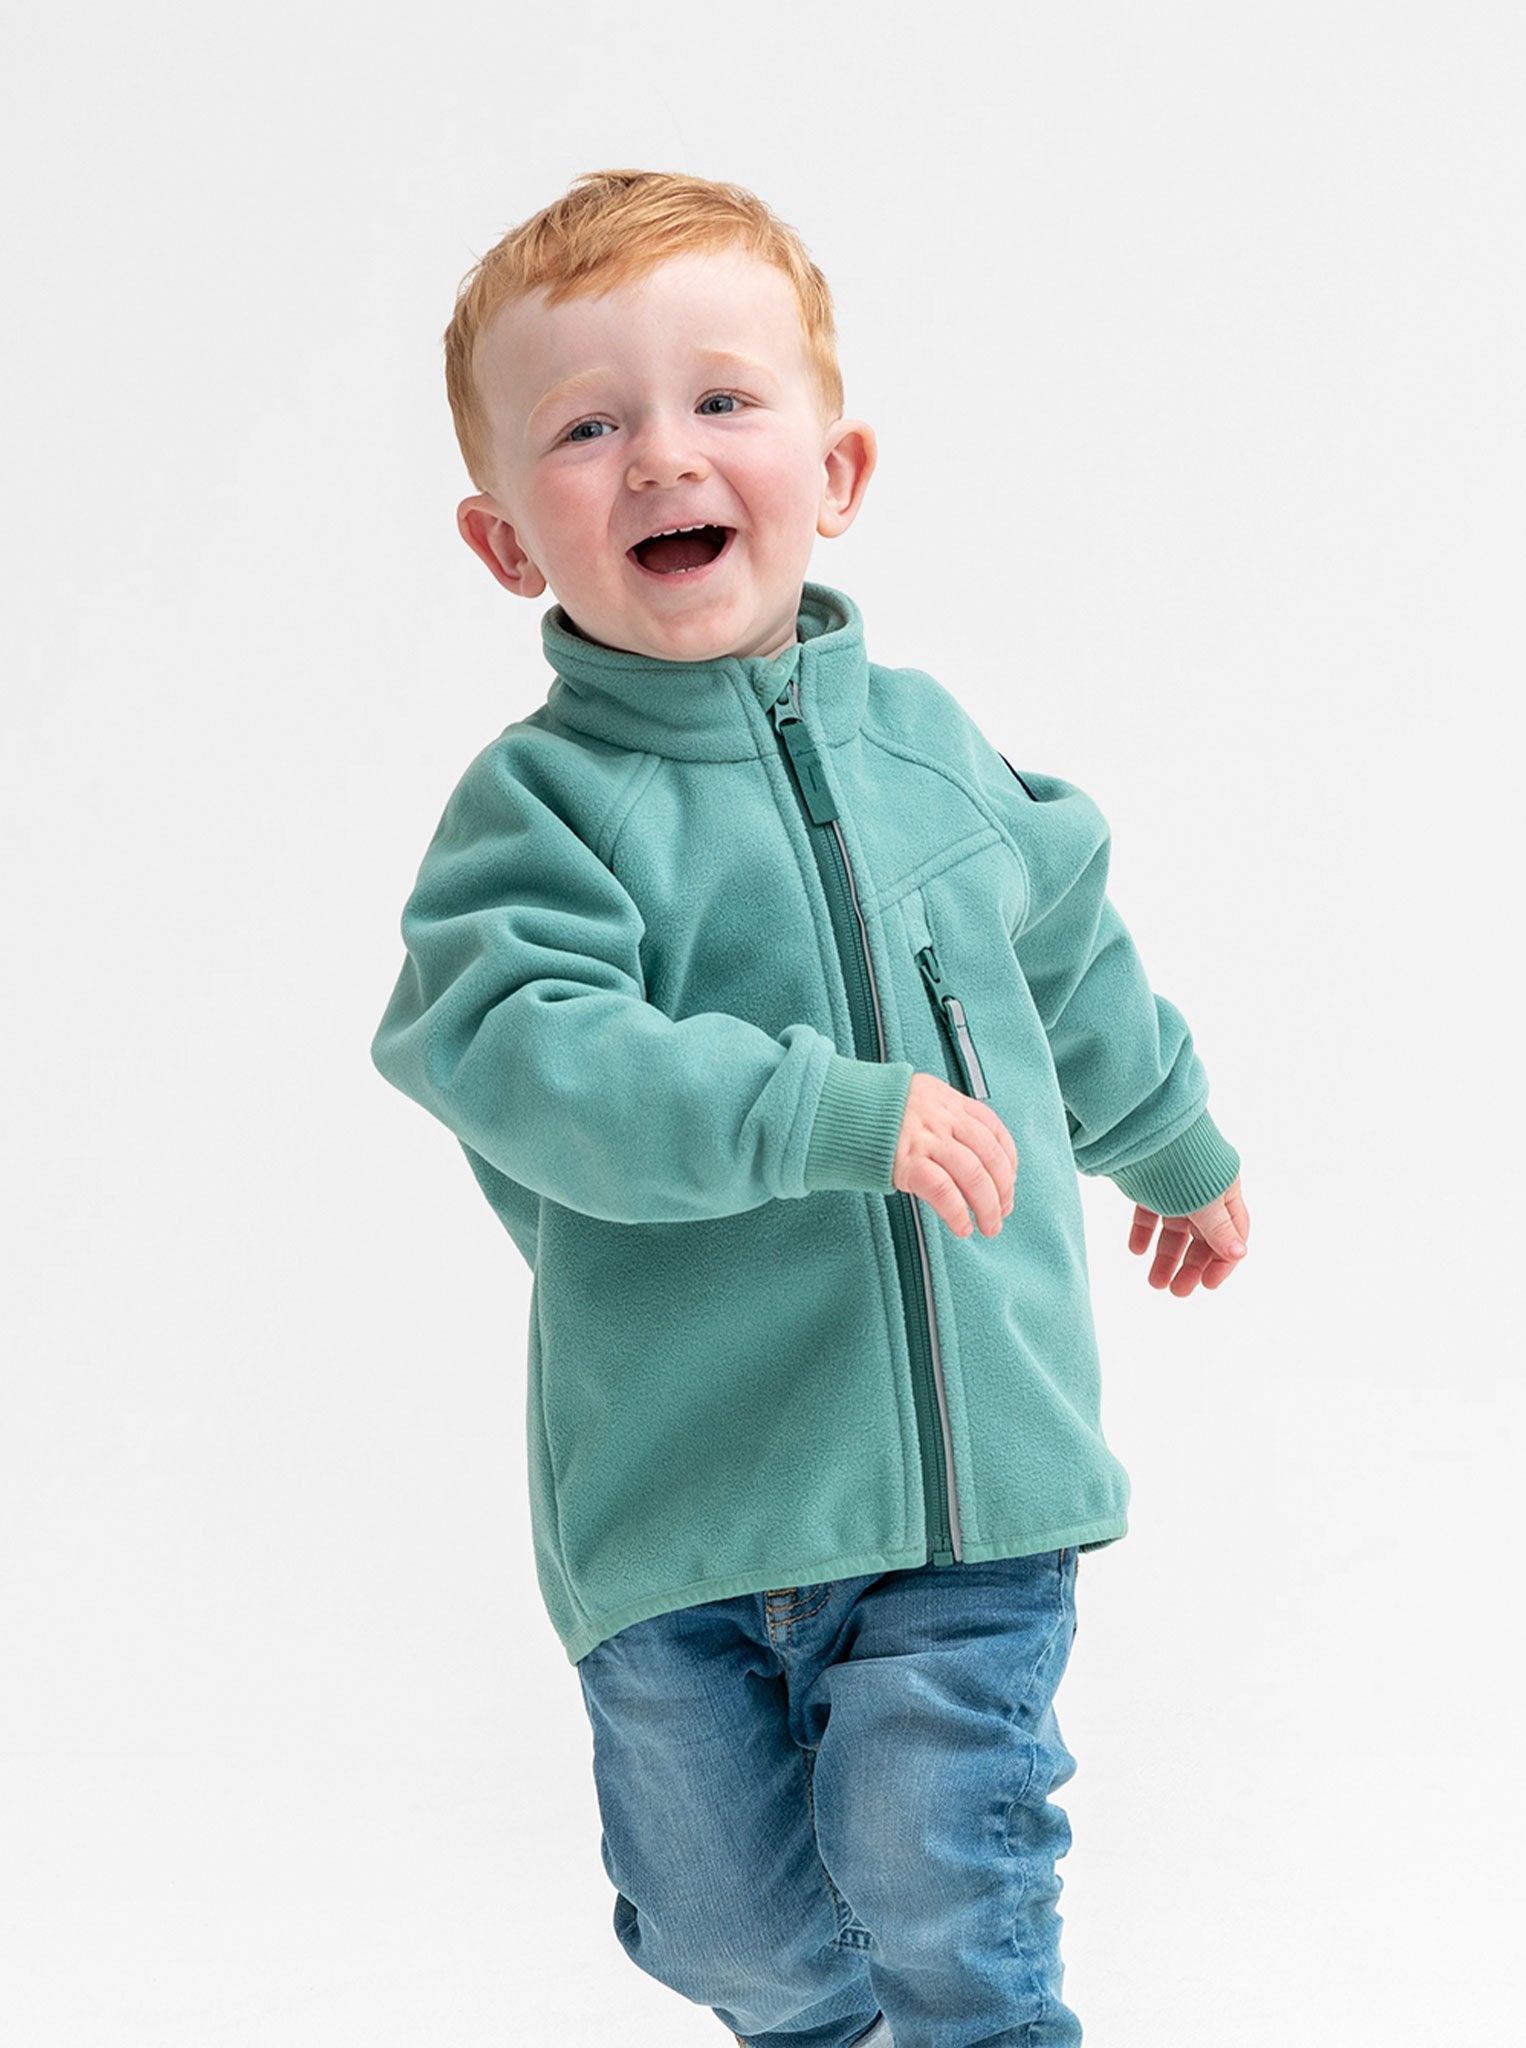 A young boy wearing a green, kids waterproof fleece jacket, with reflector zips and fit cuffs, made of breathable fabric.